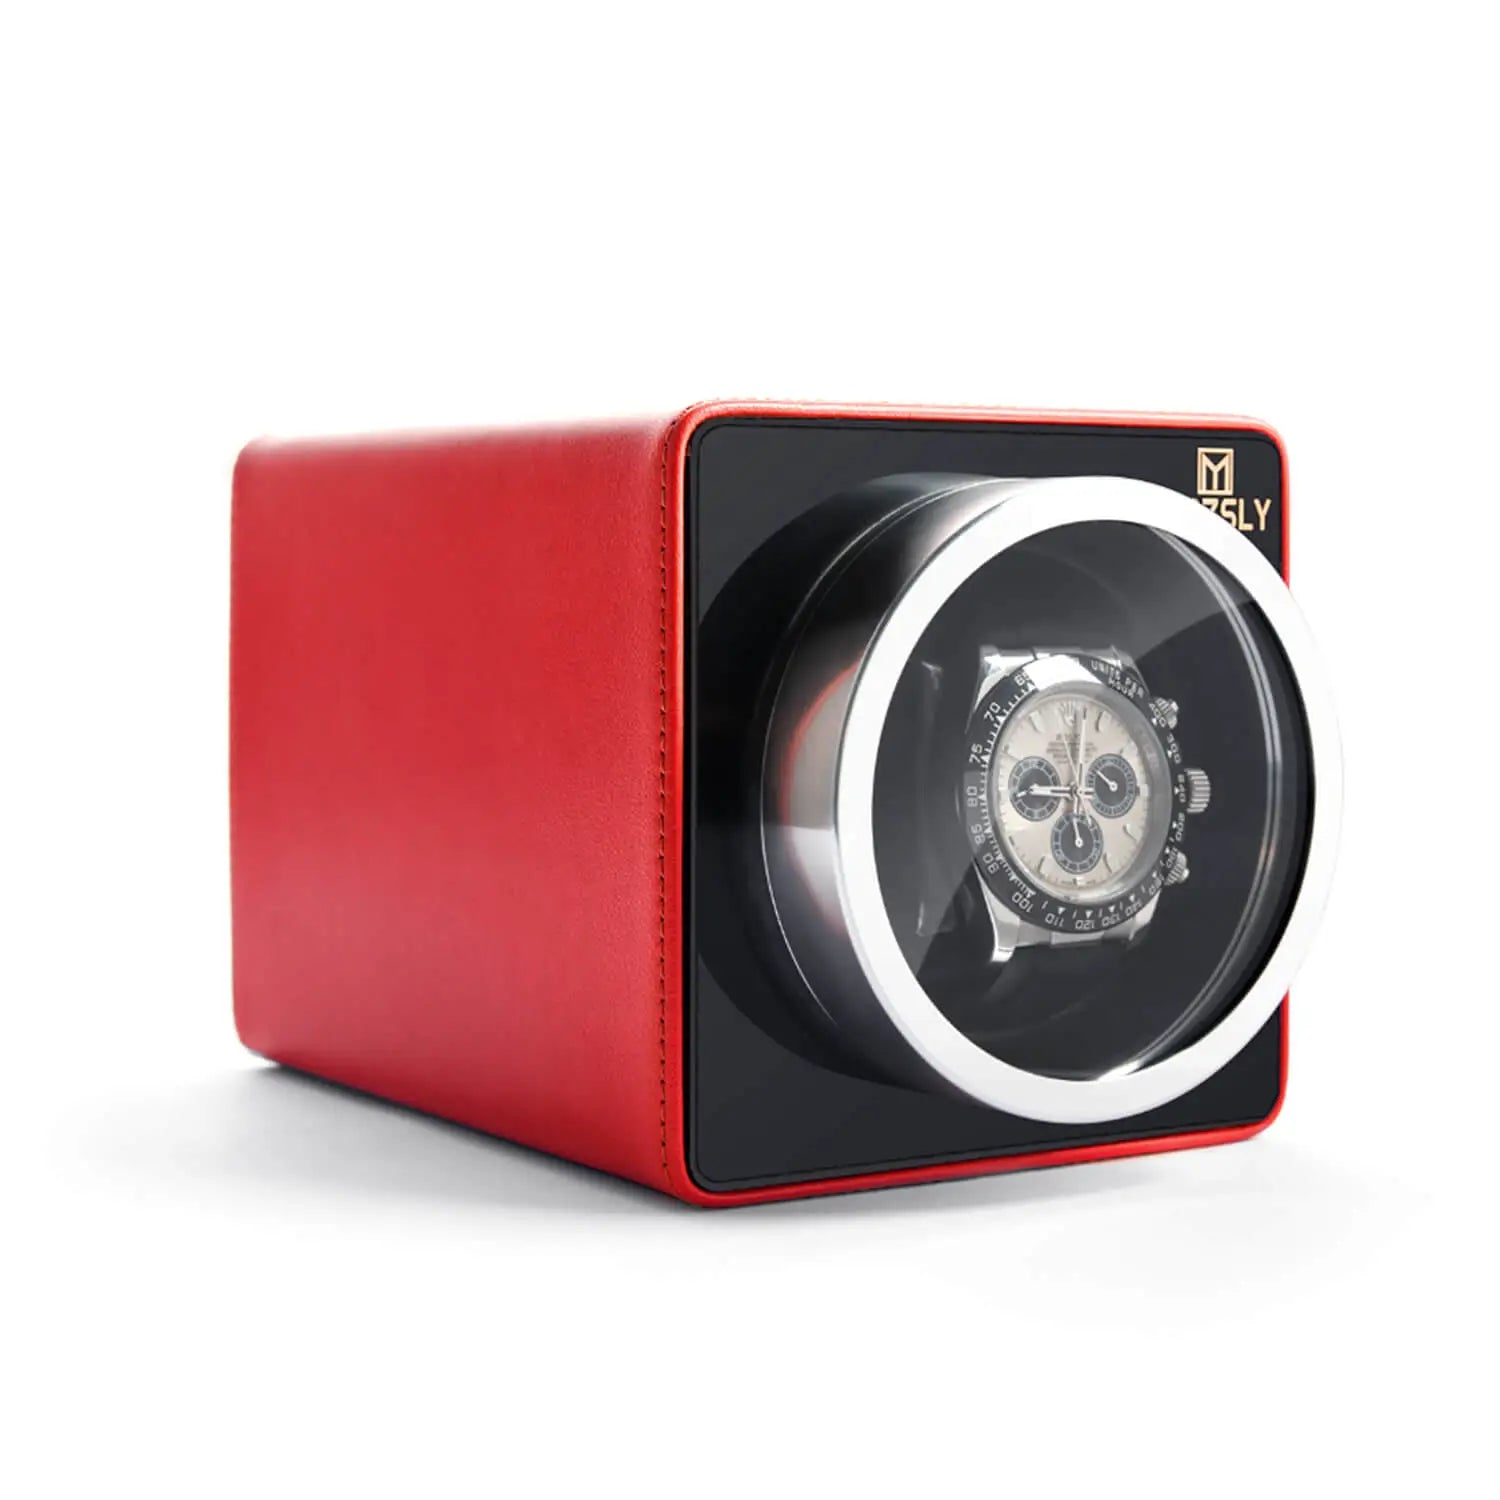 MOZSLY® Single Watch Winder - Red Leather